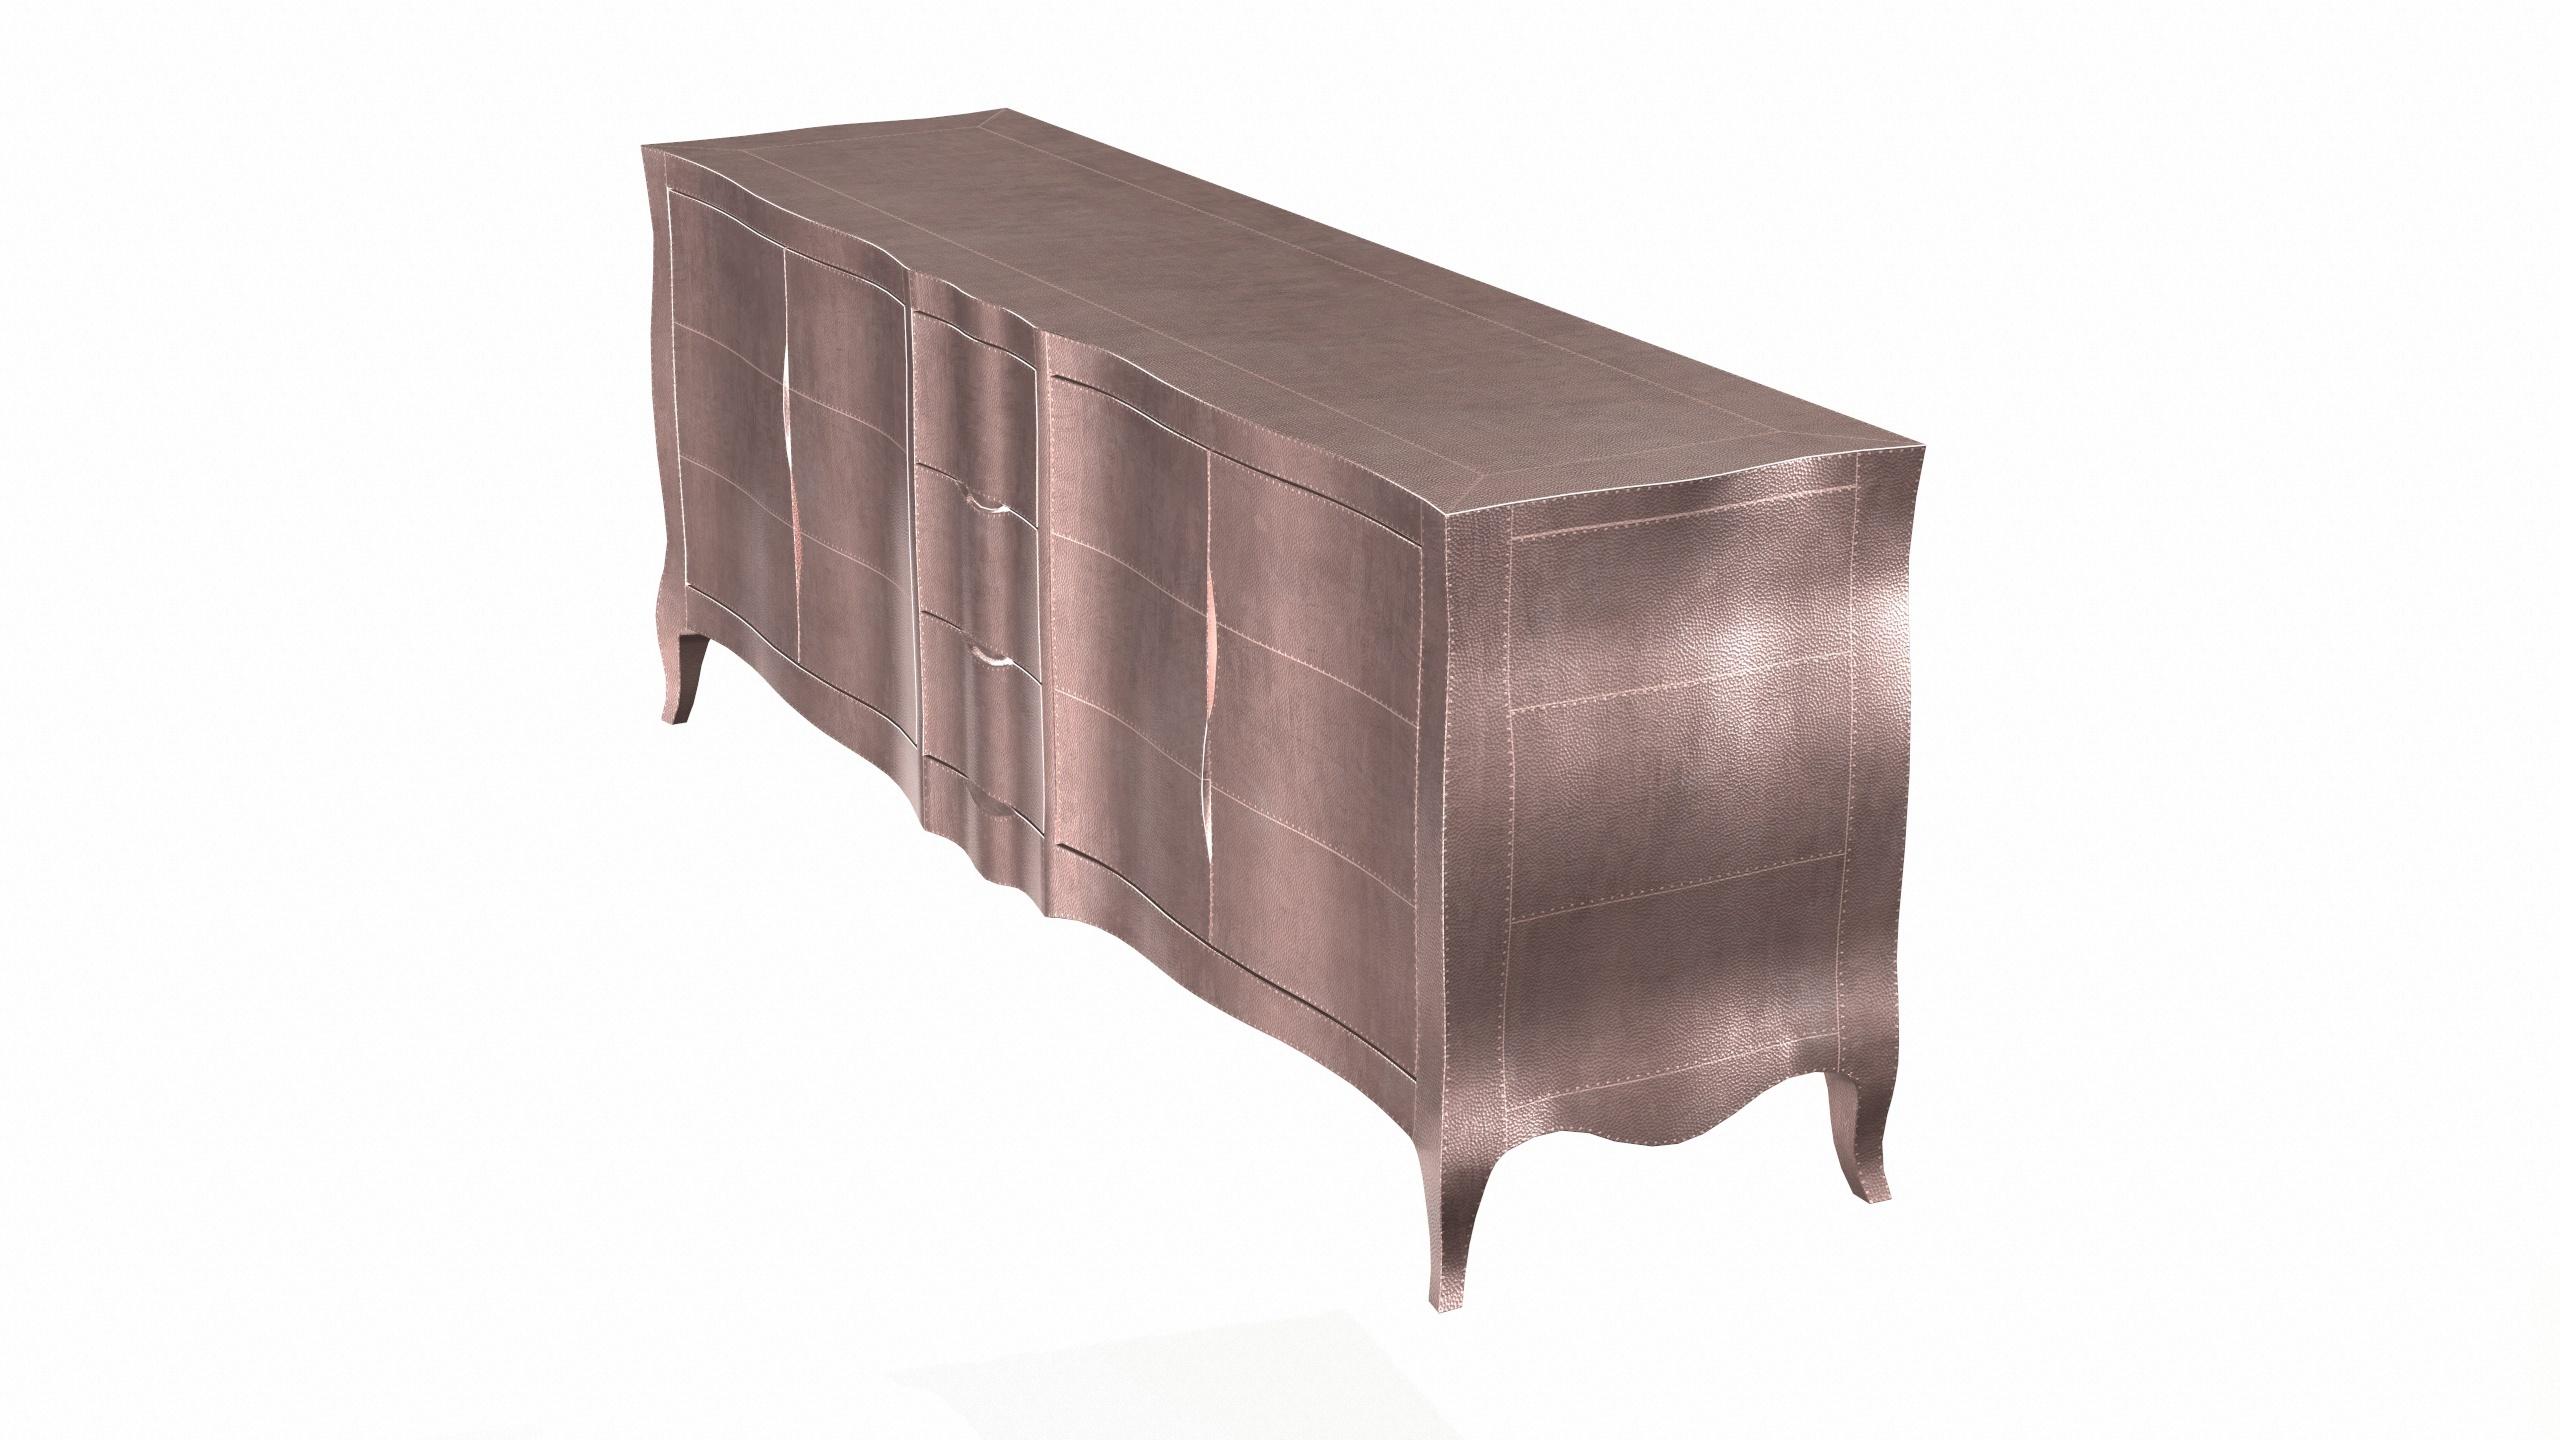 Hand-Carved Louise Credenza Art Deco Cupboards in Mid. Hammered Copper by Paul Mathieu For Sale